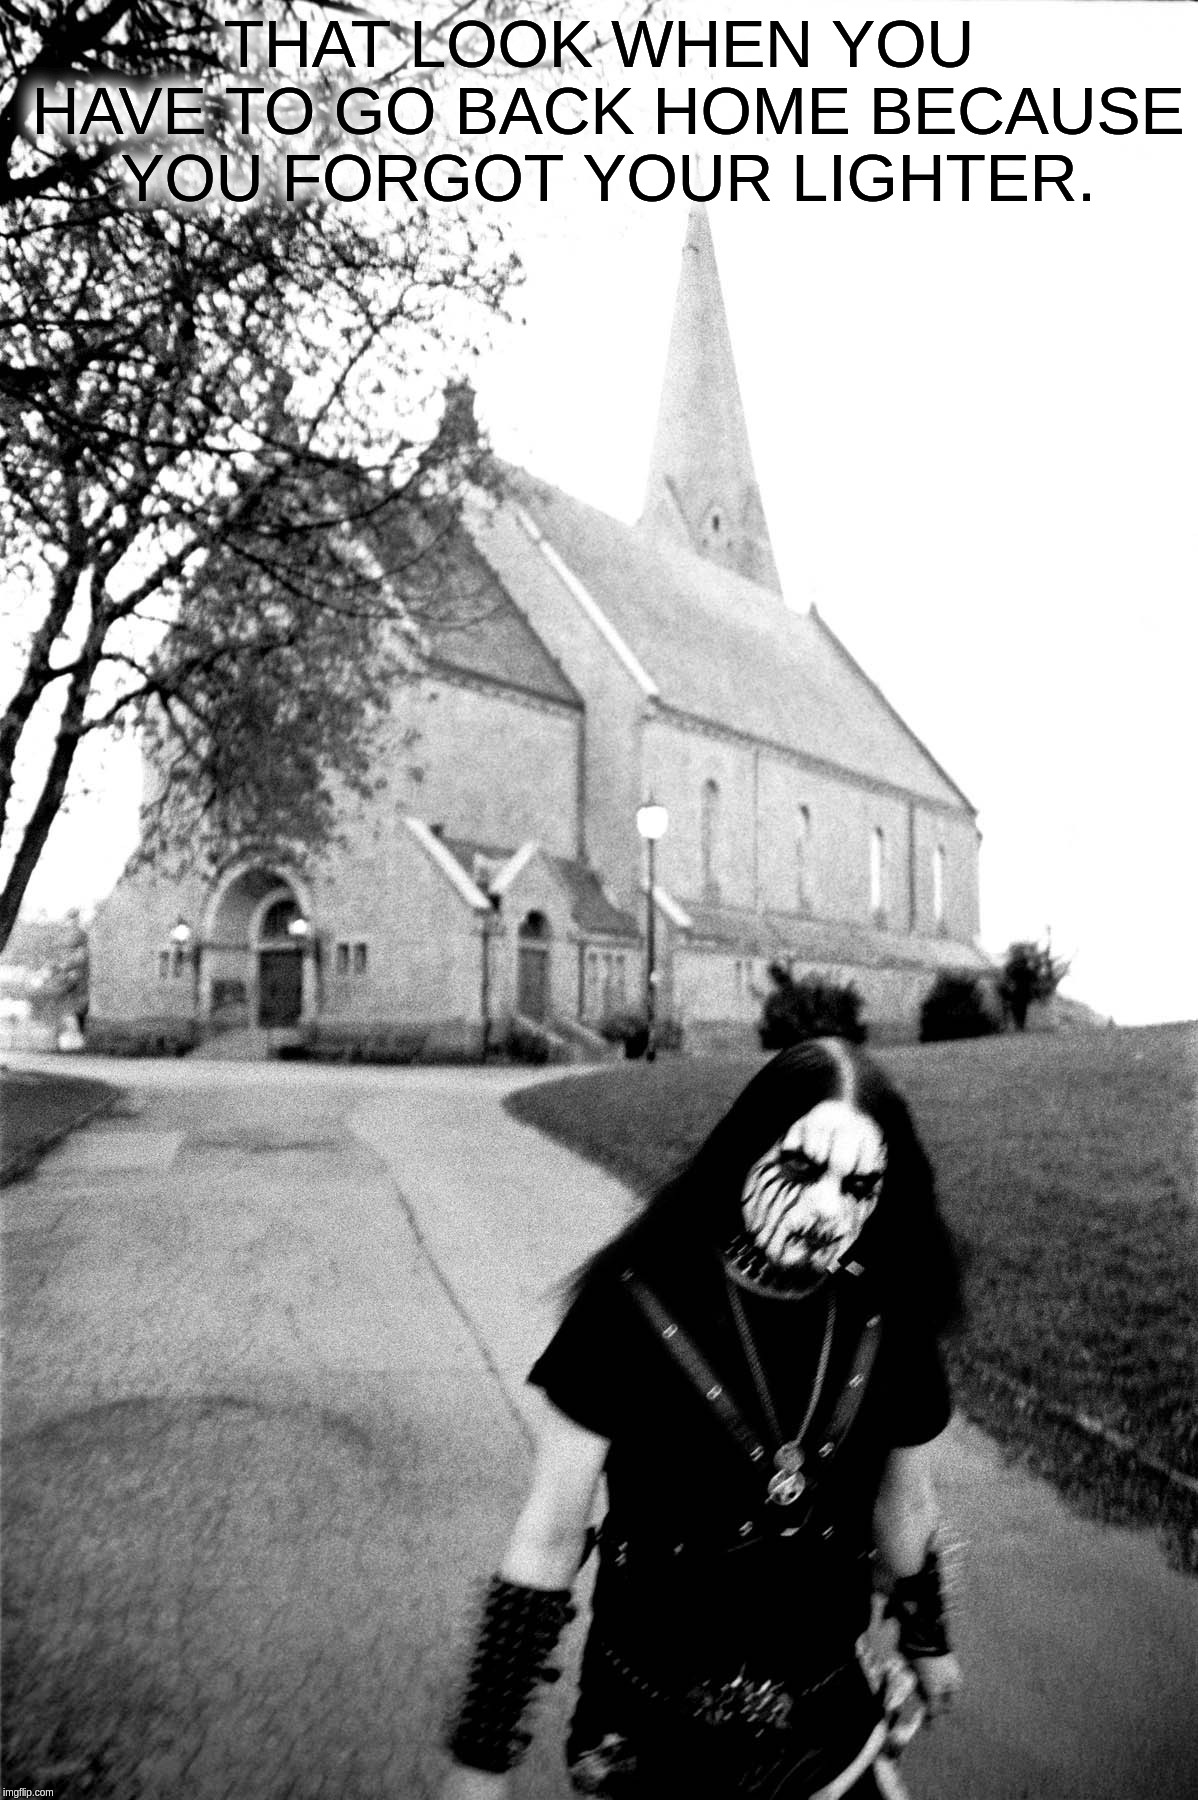 Sorrow Of Lighter |  THAT LOOK WHEN YOU HAVE TO GO BACK HOME BECAUSE YOU FORGOT YOUR LIGHTER. | image tagged in forgot,lighter,church,sorrow,black,metal | made w/ Imgflip meme maker